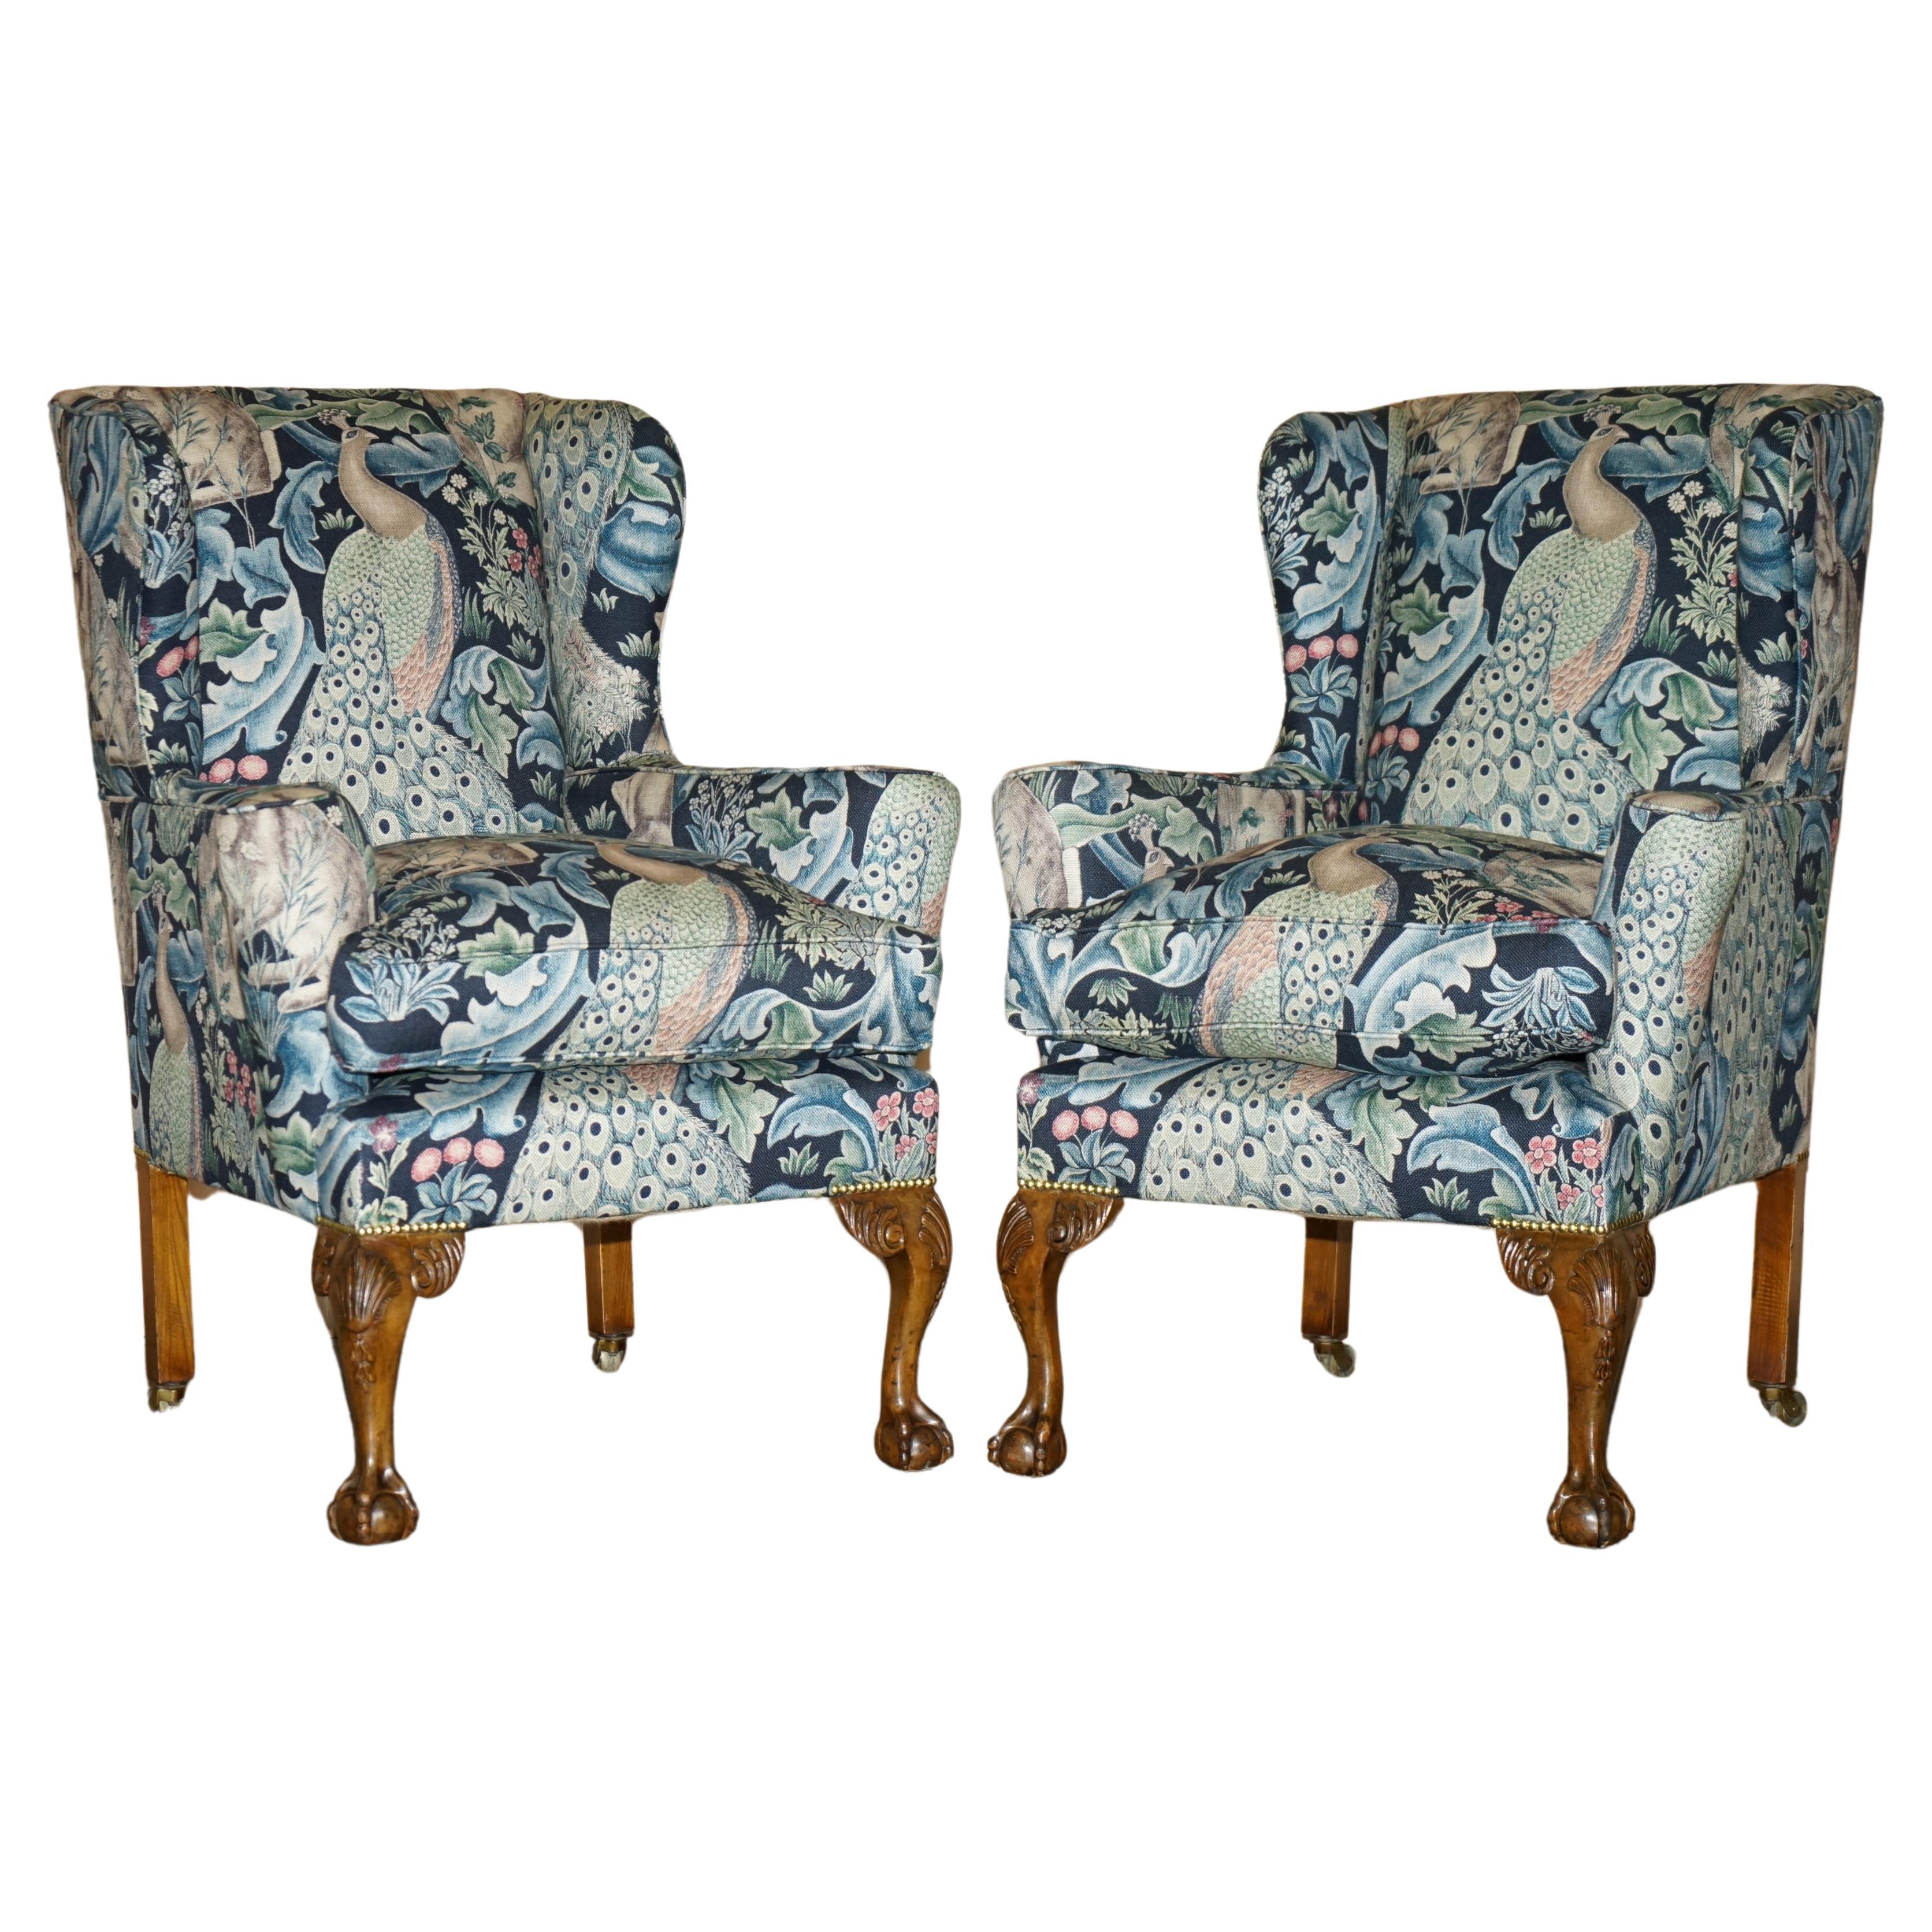 PAIR OF RESTORED ANTiQUE WILLIAM MORRIS FOREST CLAW & BALL WINGBACK ARMCHAIRS For Sale